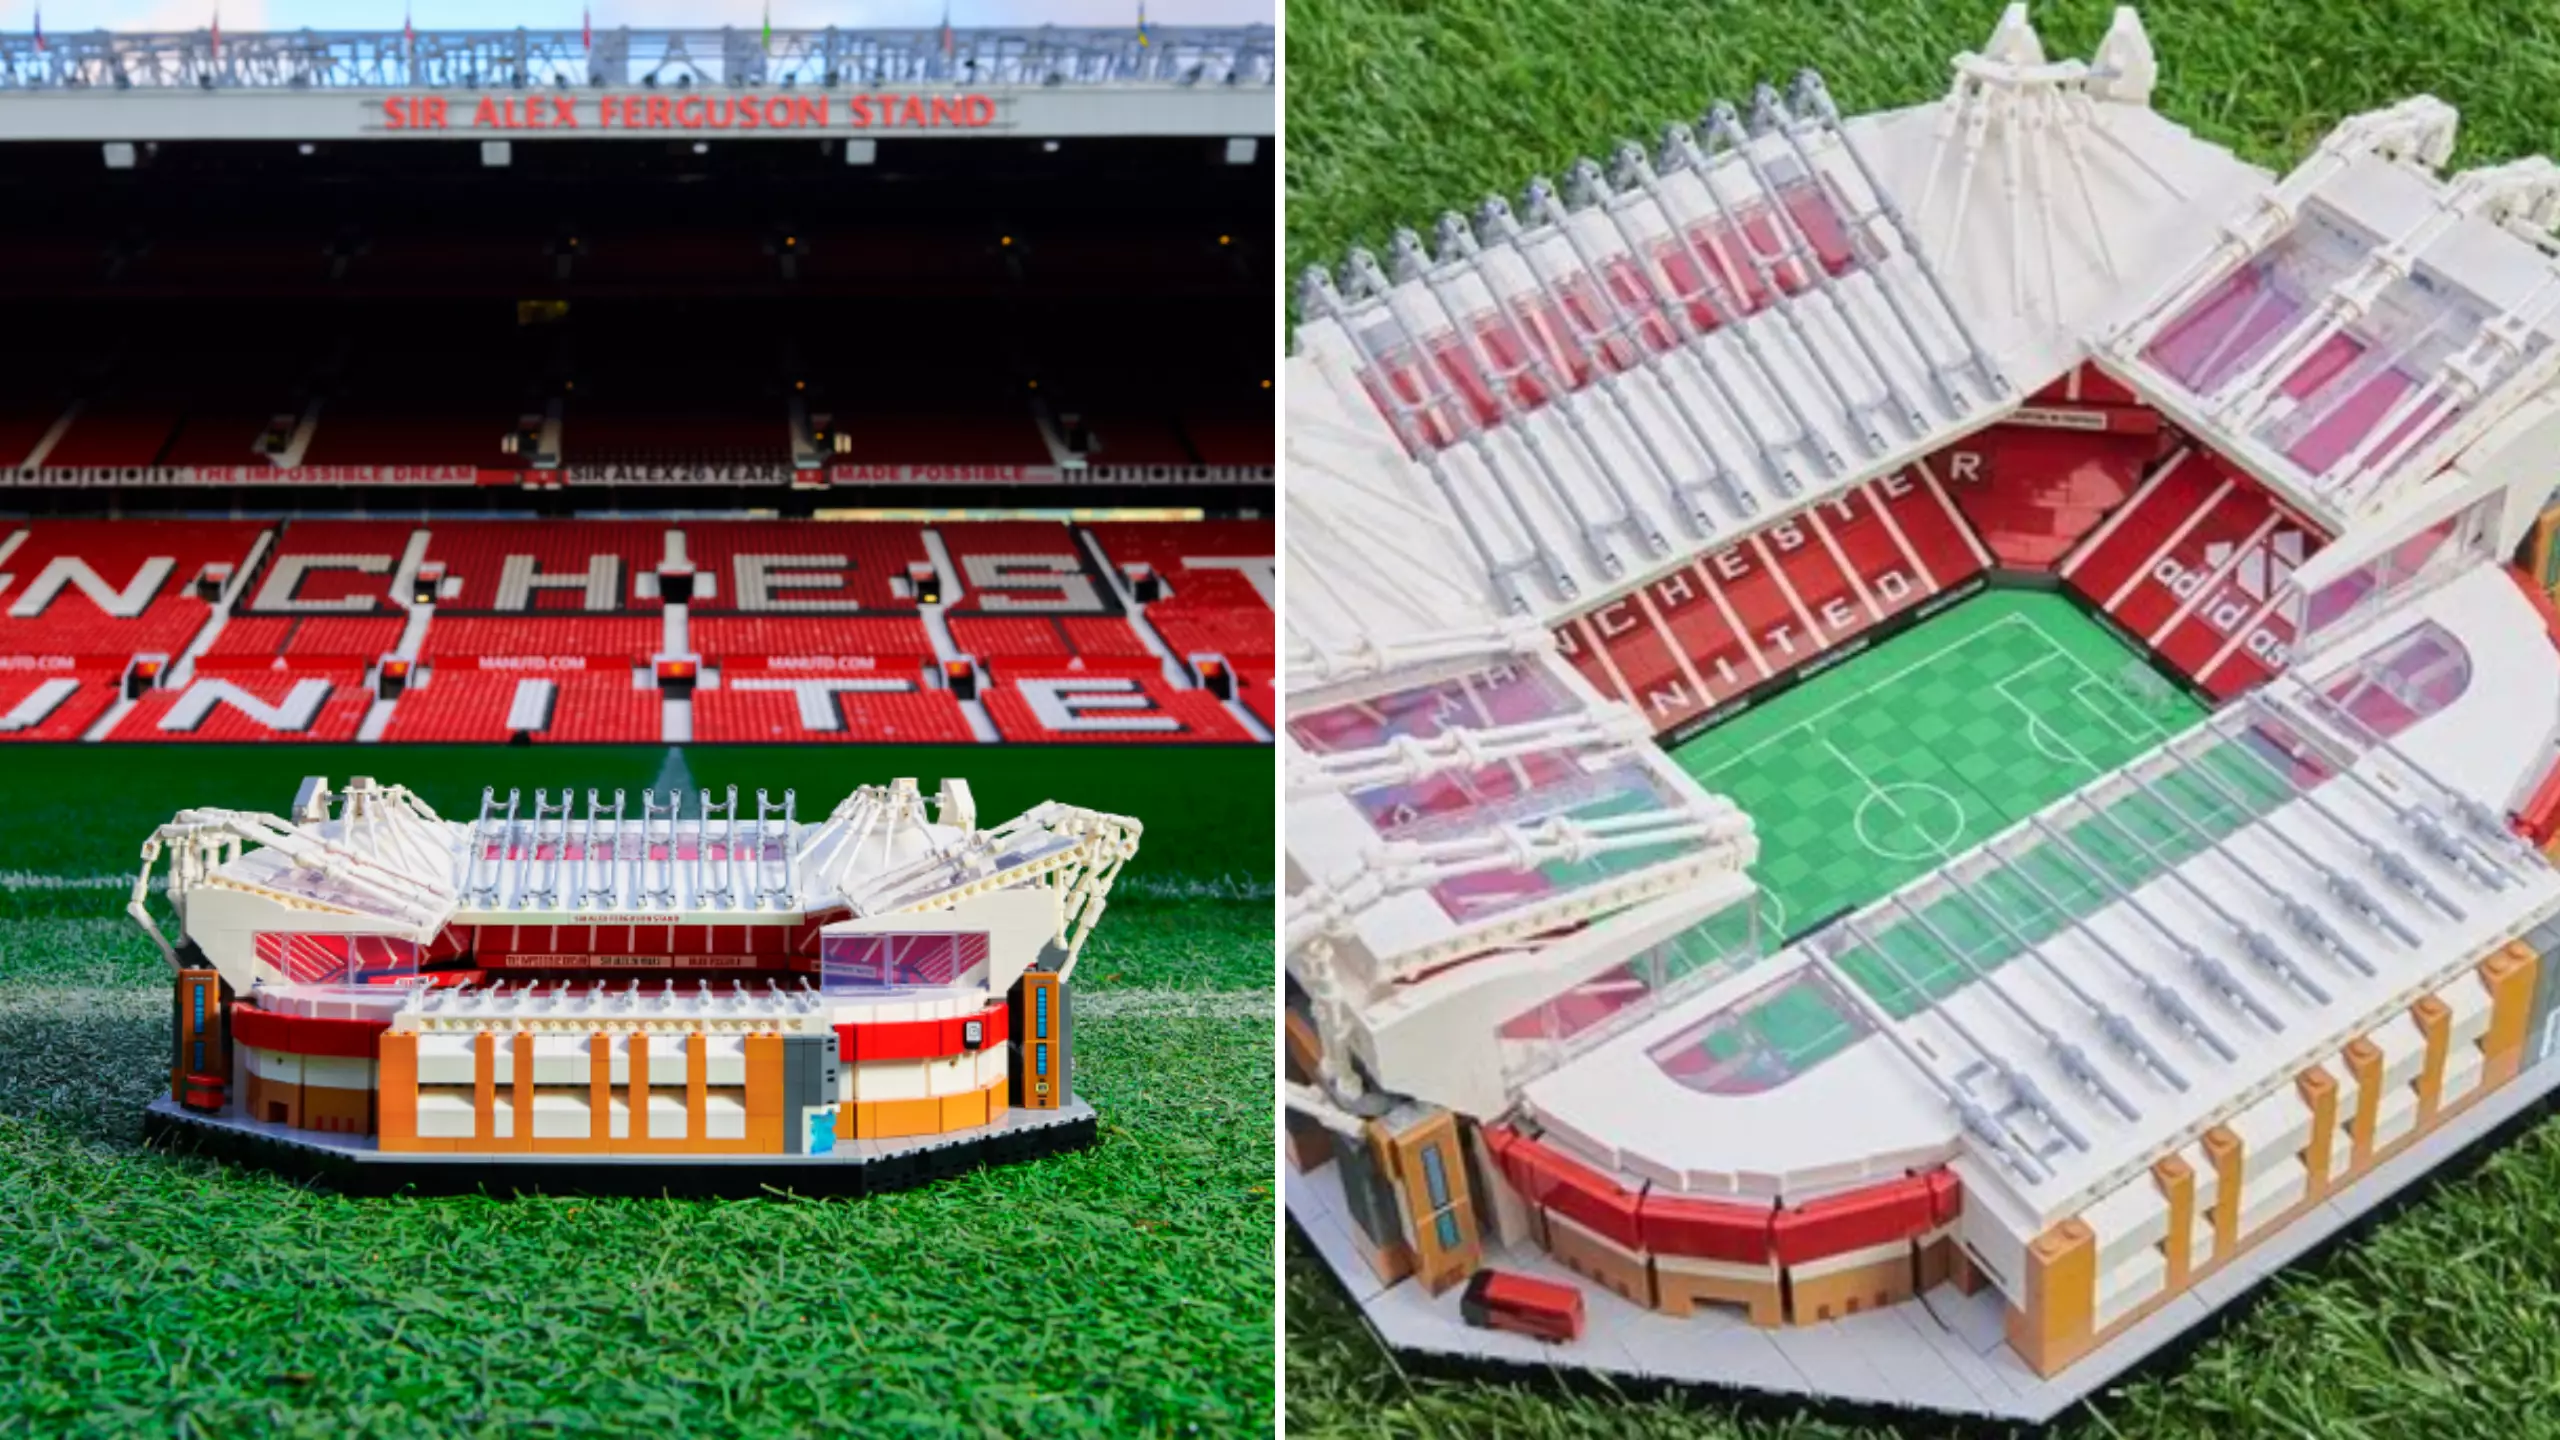 LEGO Have Released A 3898-Piece Set Of Manchester United's Old Trafford Stadium